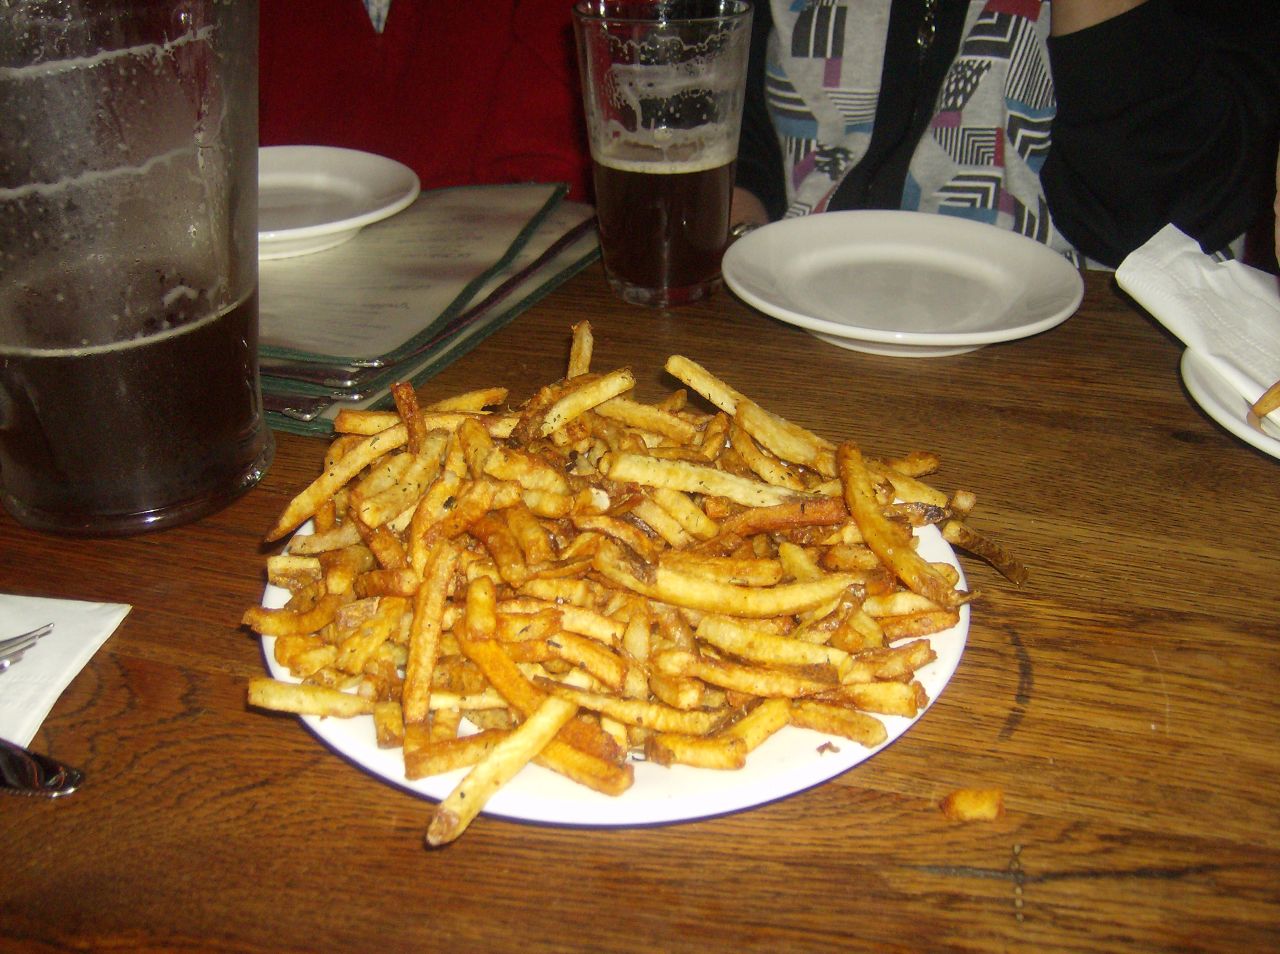 there are many small fries on the plate